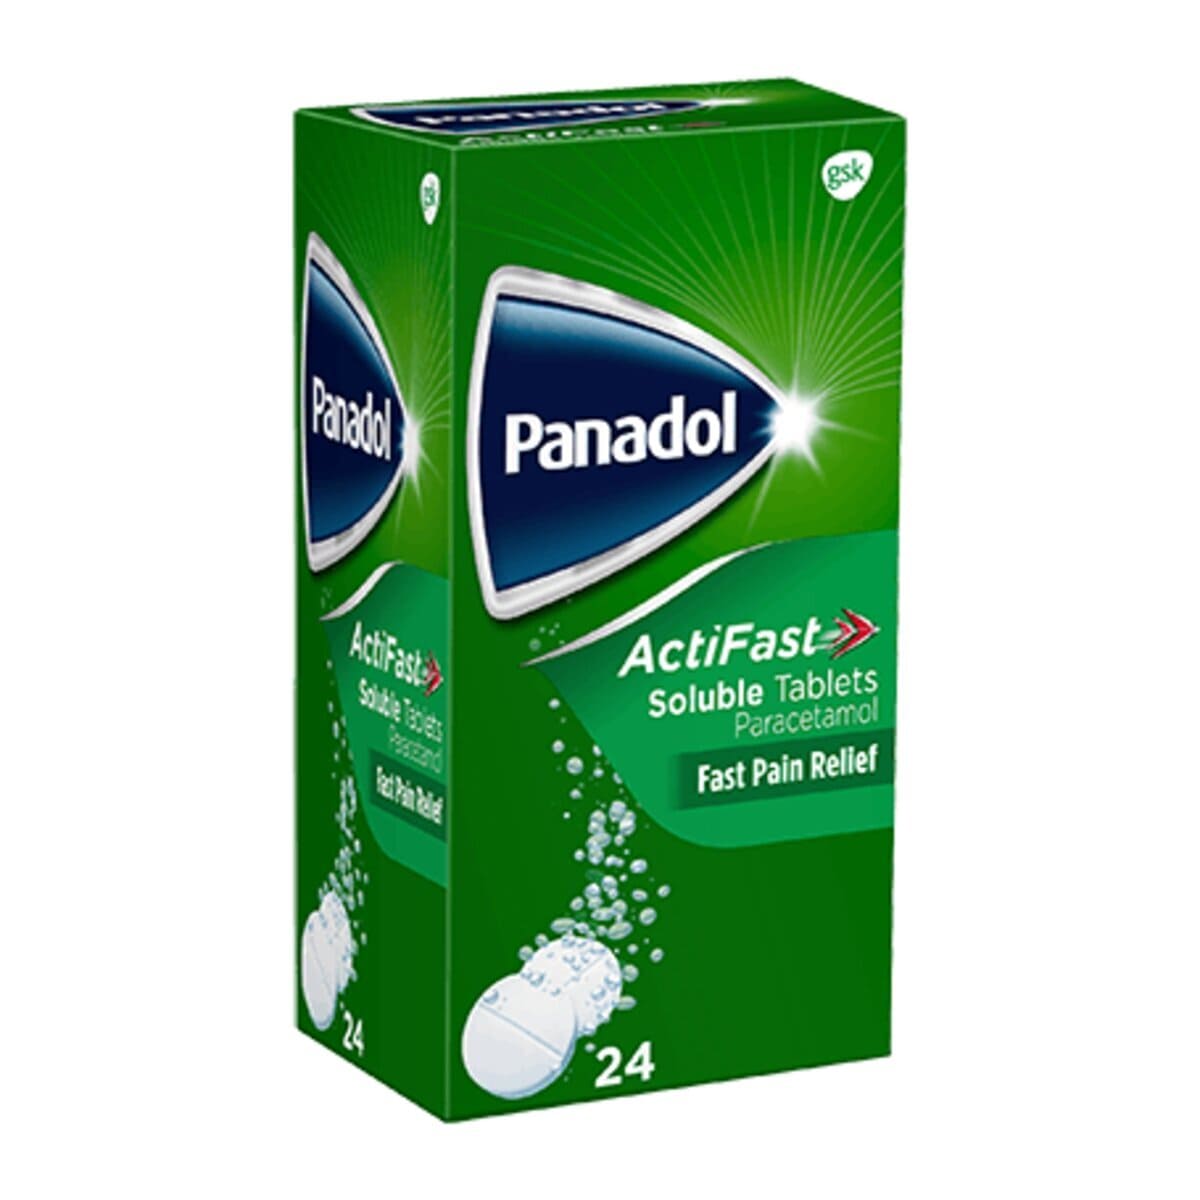 PANADOL ACTIFAST SOLUBLE TABLETS, 24 TABLETS